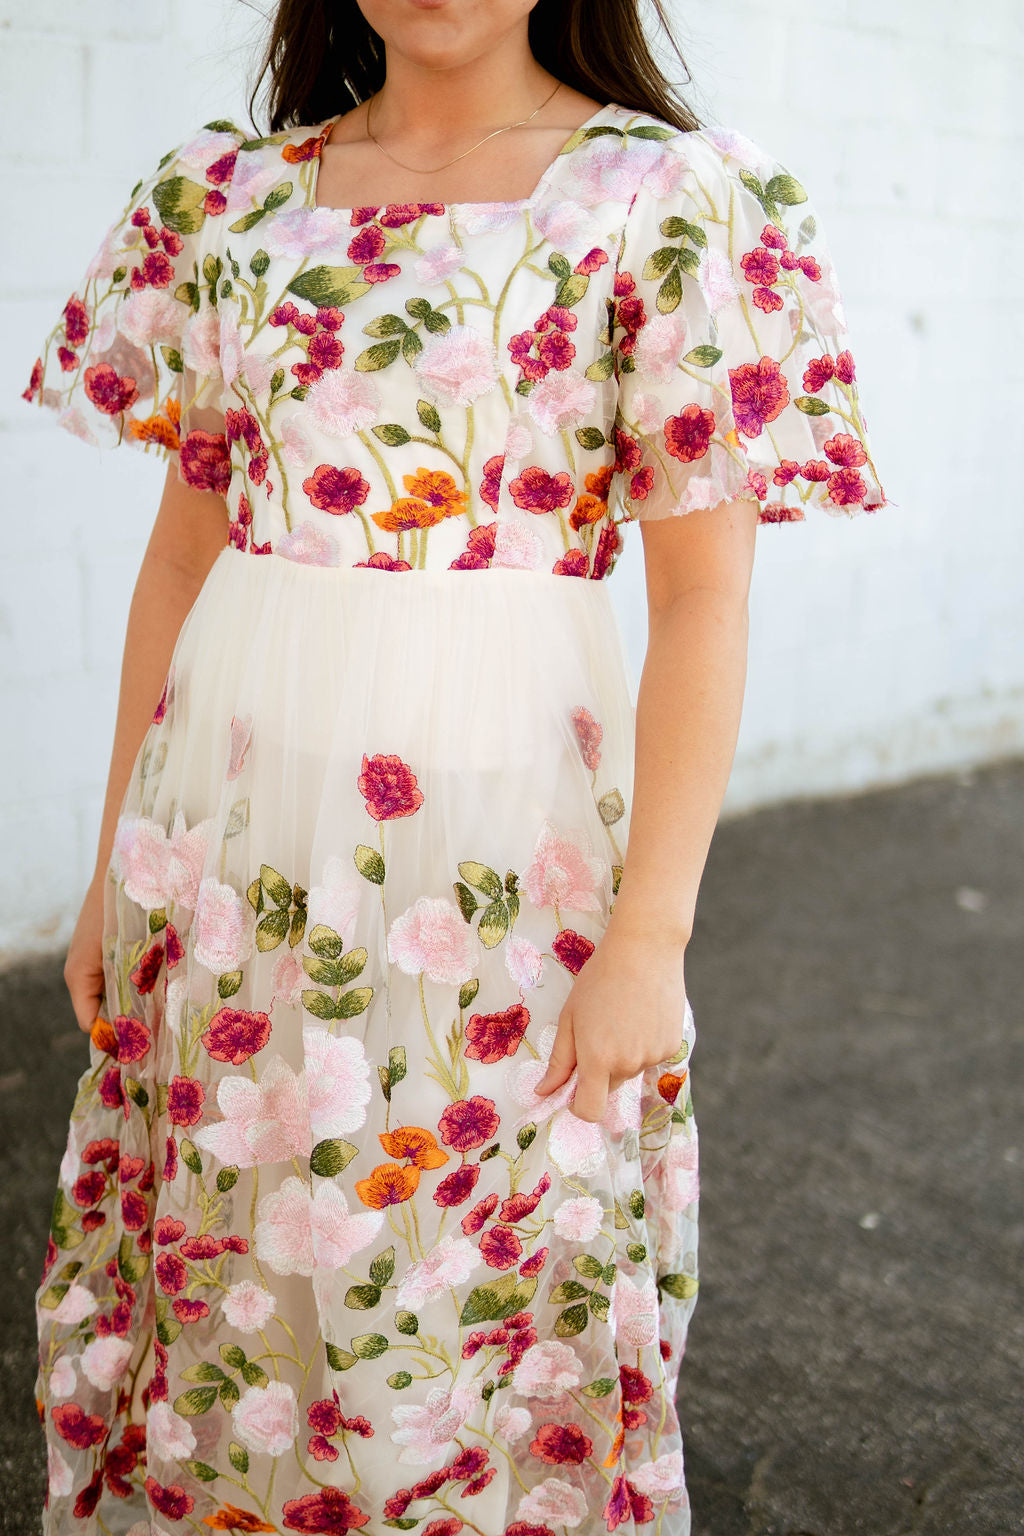 Spring floral dress with empire waist and floral embroidery